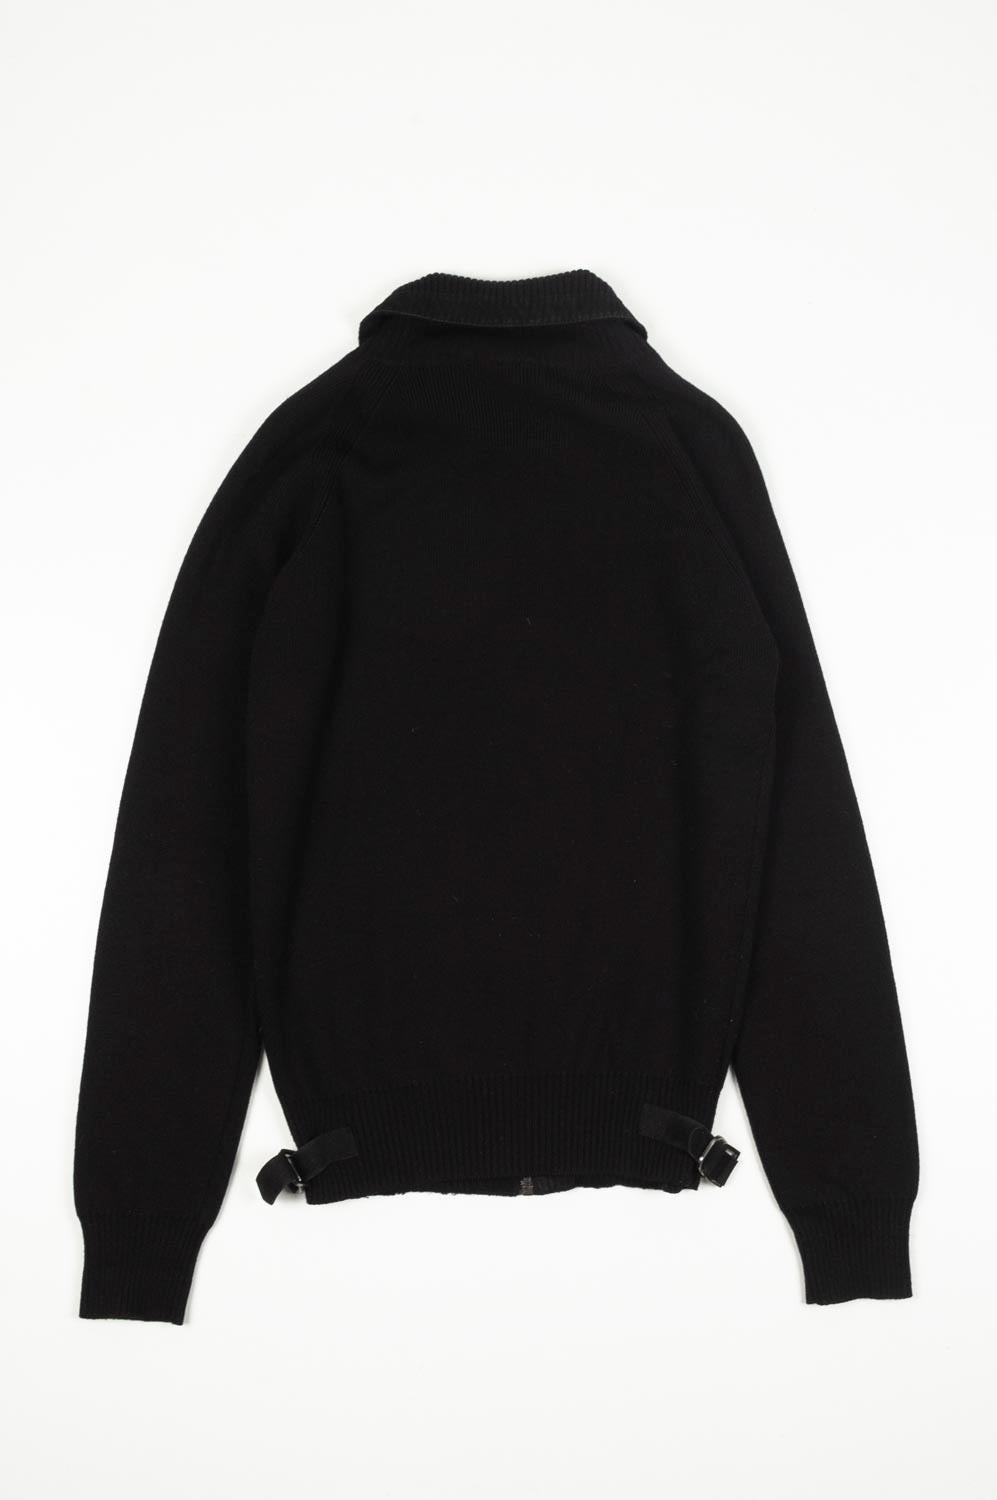 Gucci Men Sweater Front Suede Leather Part Size M S525 For Sale 1